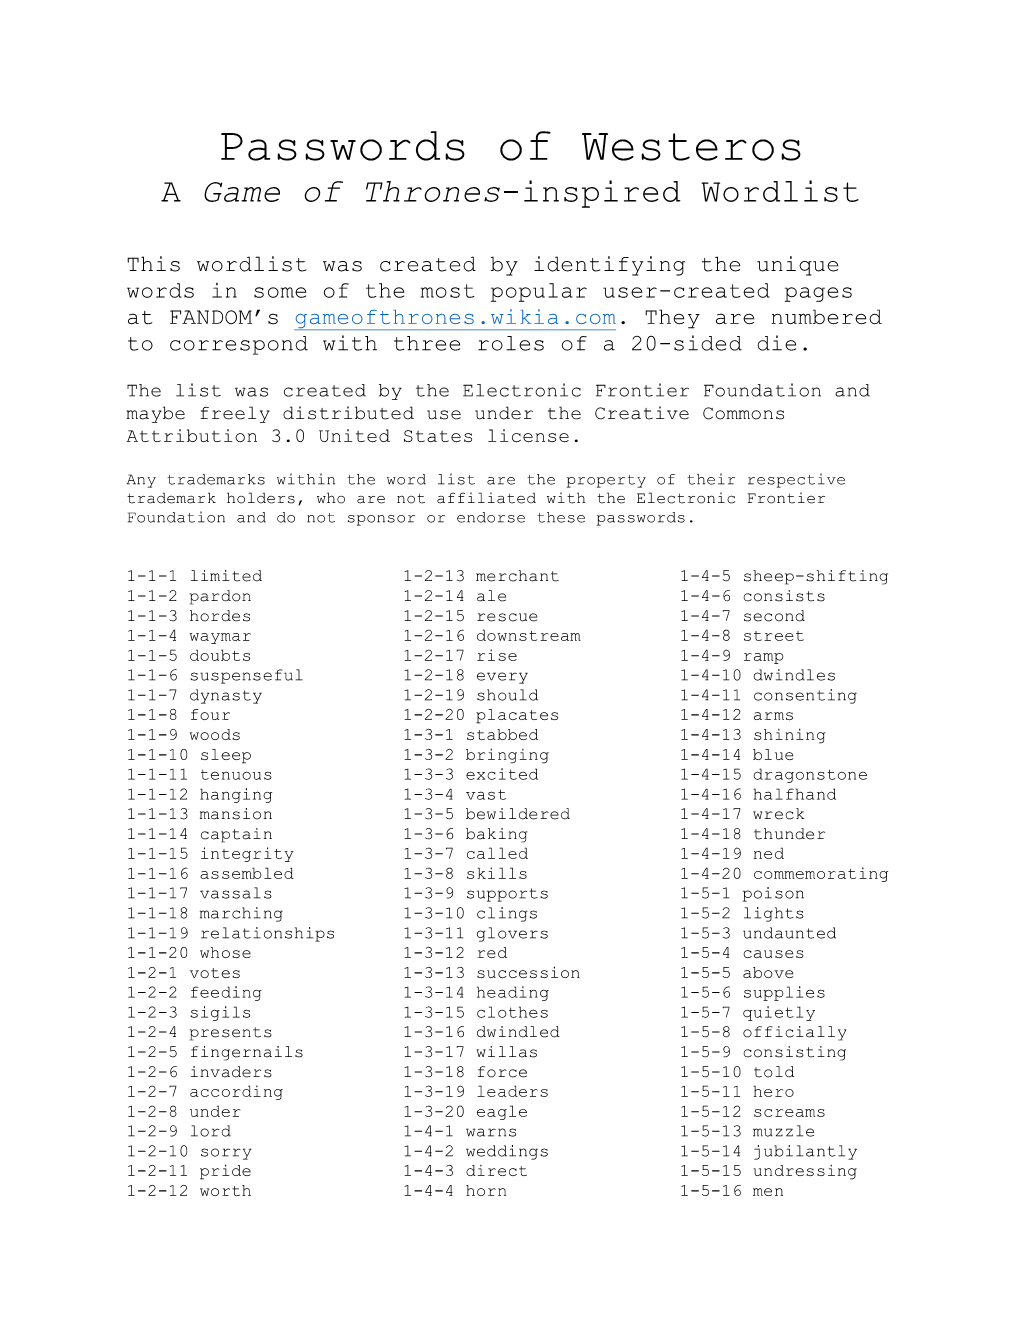 Passwords of Westeros a Game of Thrones-Inspired Wordlist